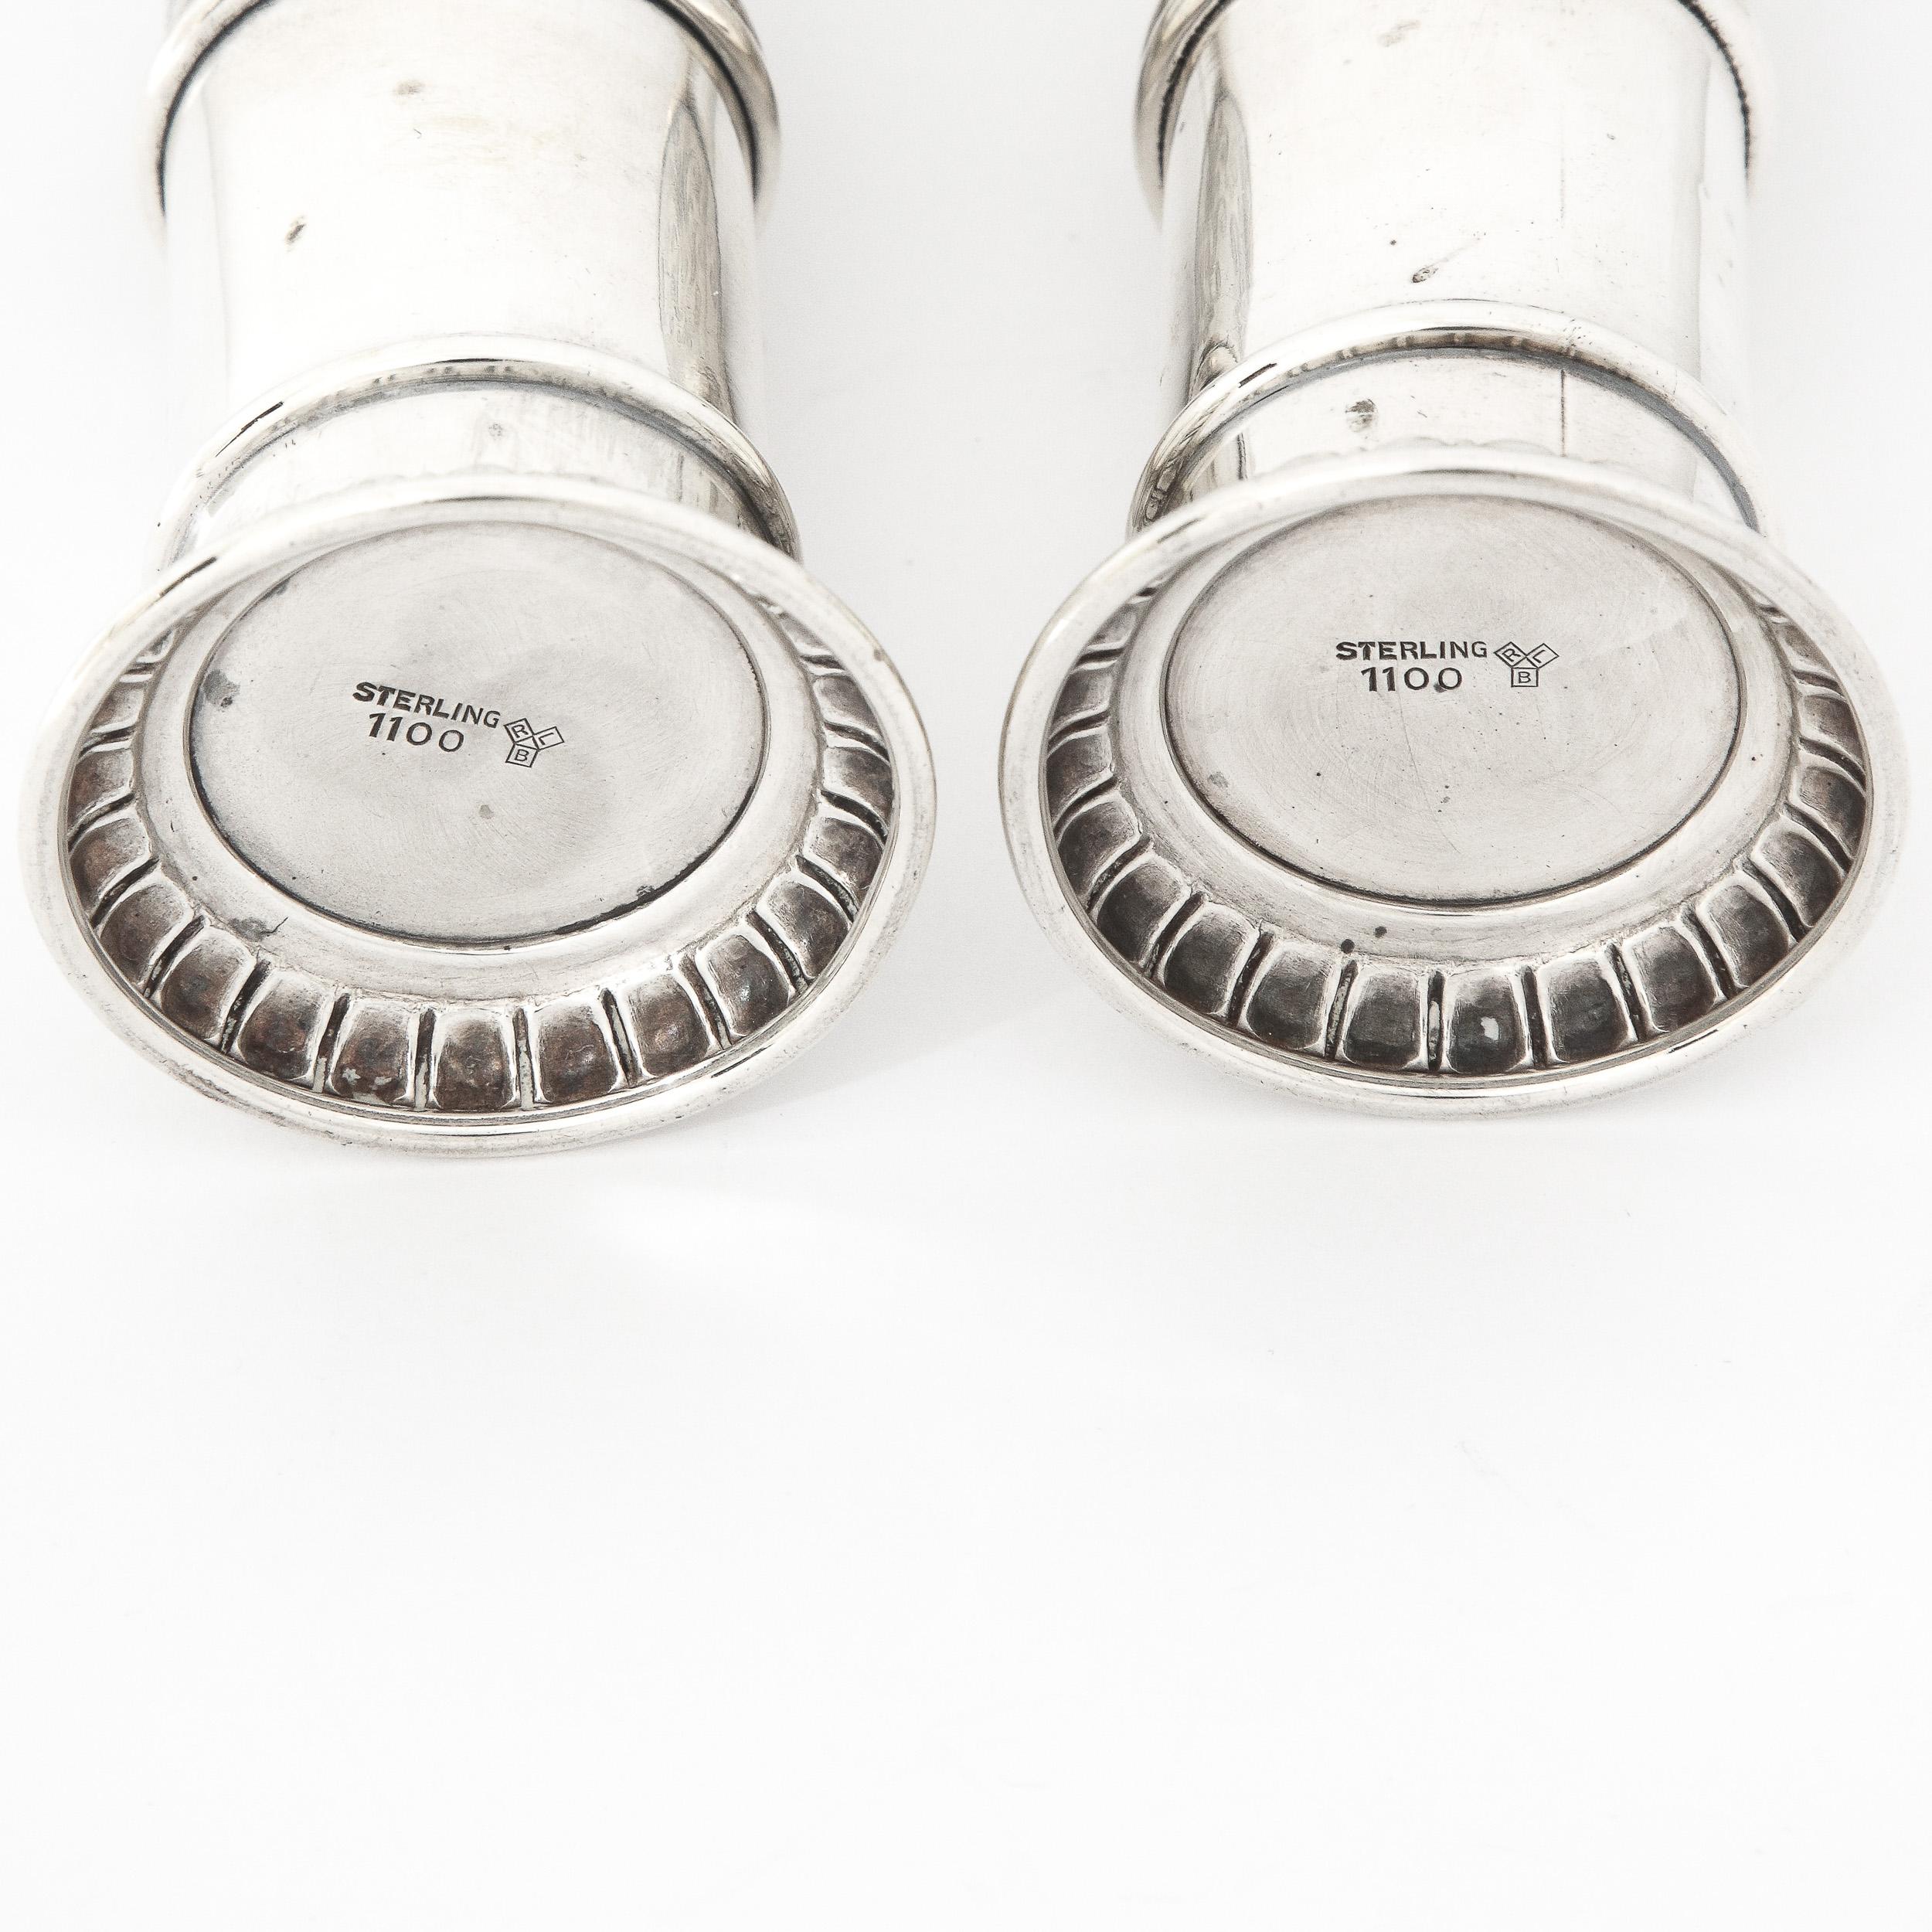 Pair of Art Deco Sterling Salt and Pepper Shakers by Rogers, Lunt and Bowlen Co. For Sale 4